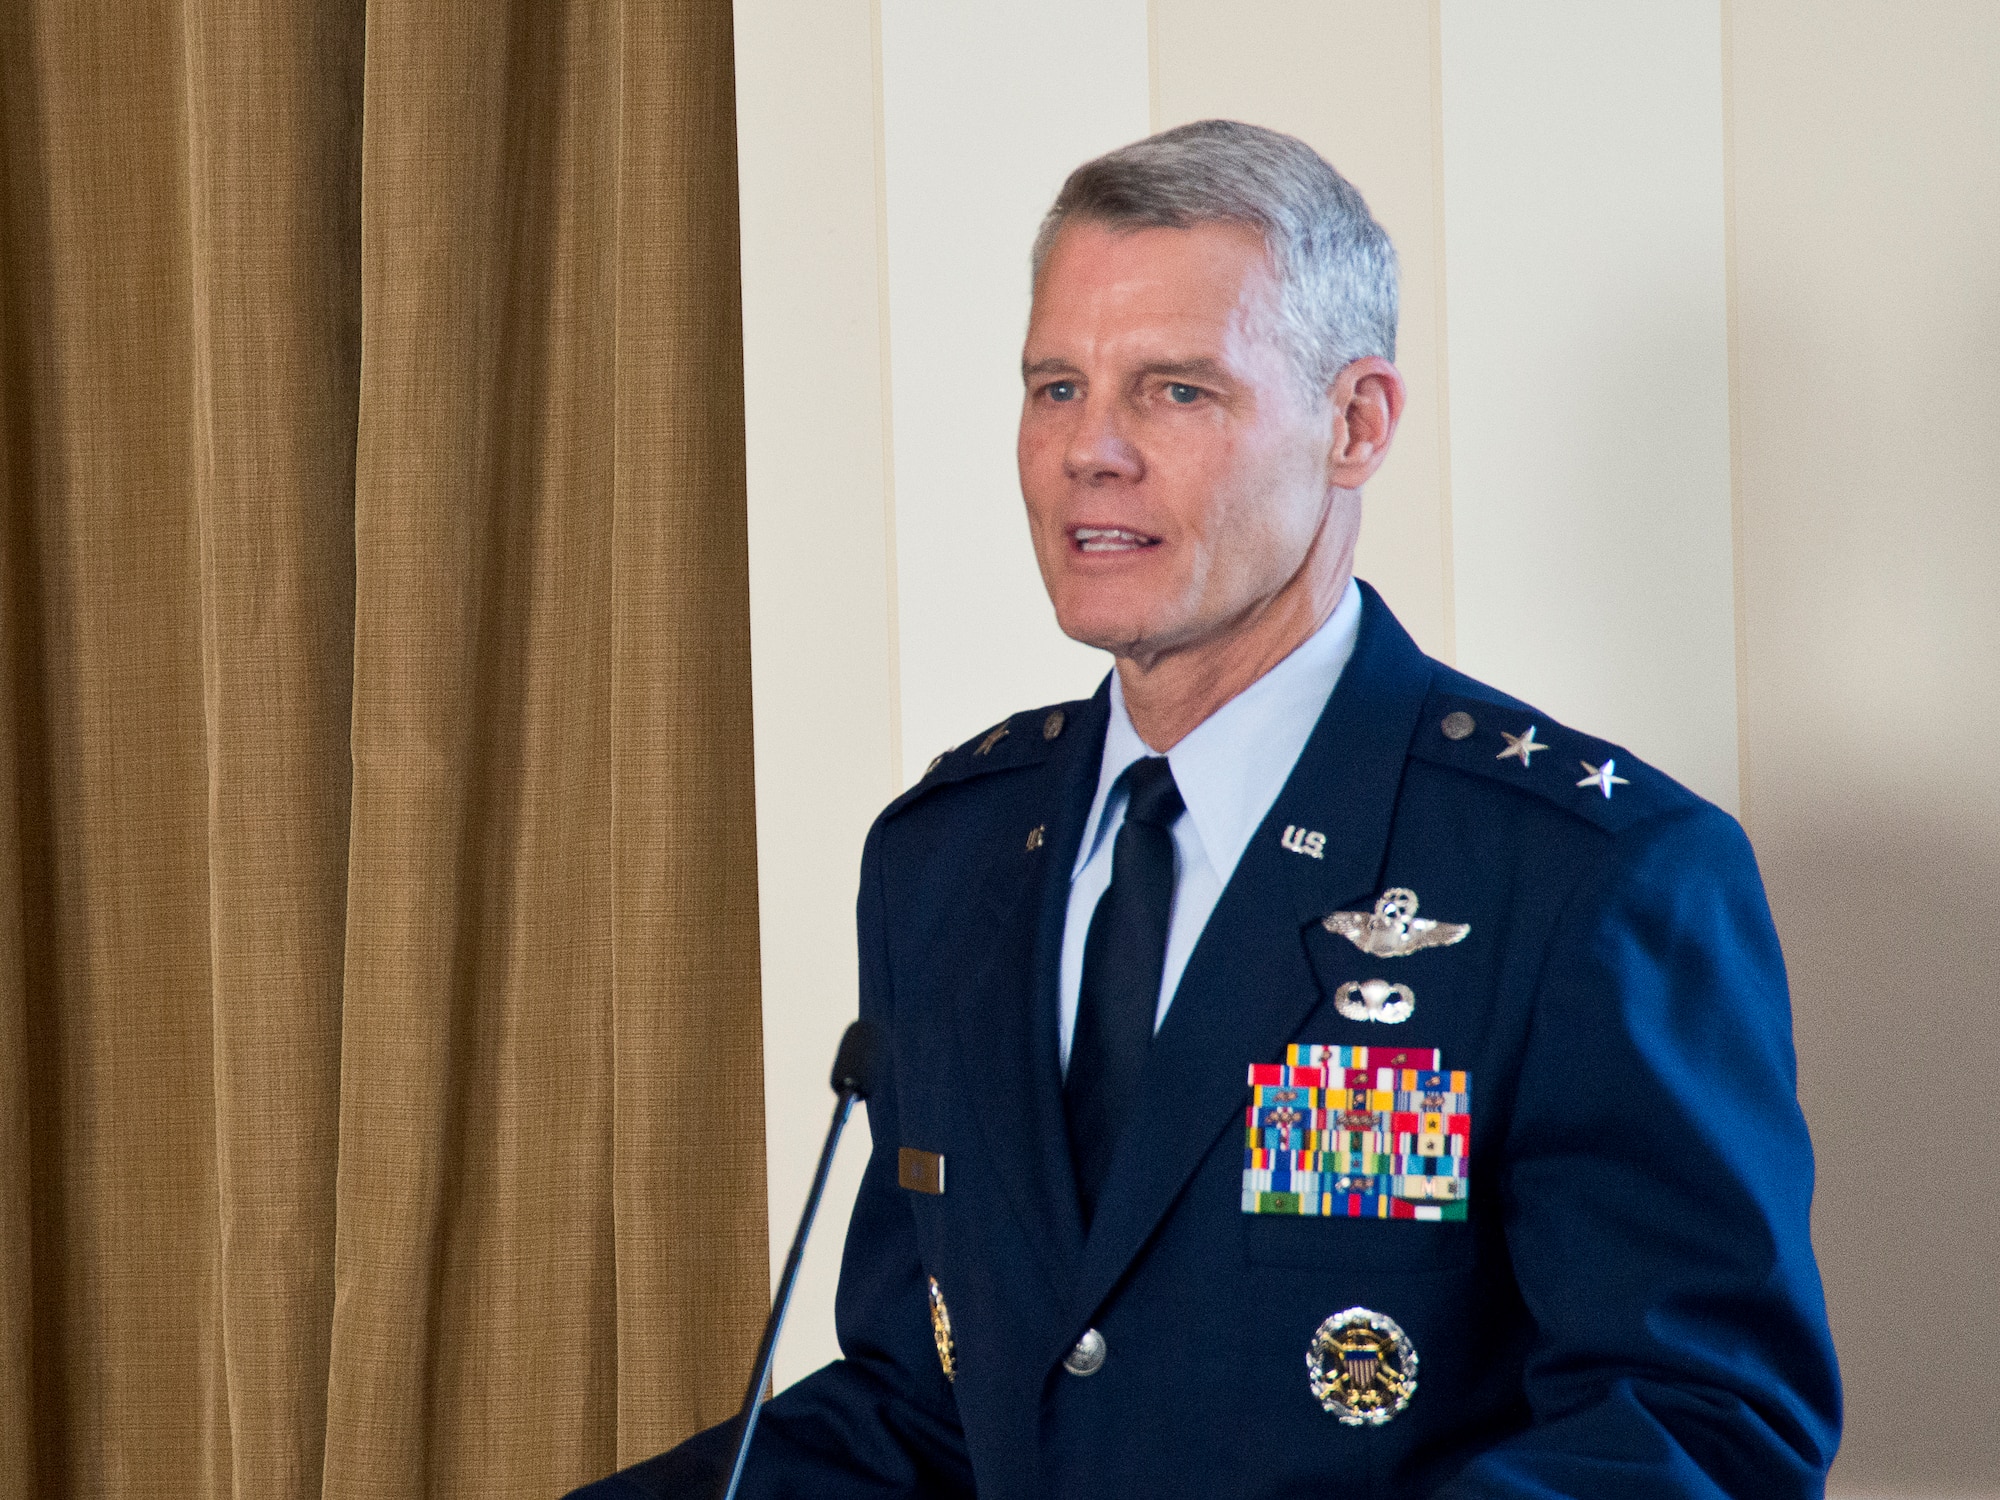 Acting Director of the Air National Guard, Maj. Gen. Brian G. Neal, thanks ANG members for their dedication and professionalism at the Air Force Association's 14th annual Salute to the Air National Guard, held March 30, 2016, in Arlington, Virginia. The AFA honored 18 ANG members across a broad range of specialties for their outstanding contributions to the success of the ANG and the overall Air Force mission. (US Air National Guard photo by Staff Sgt. John E. Hillier/released)